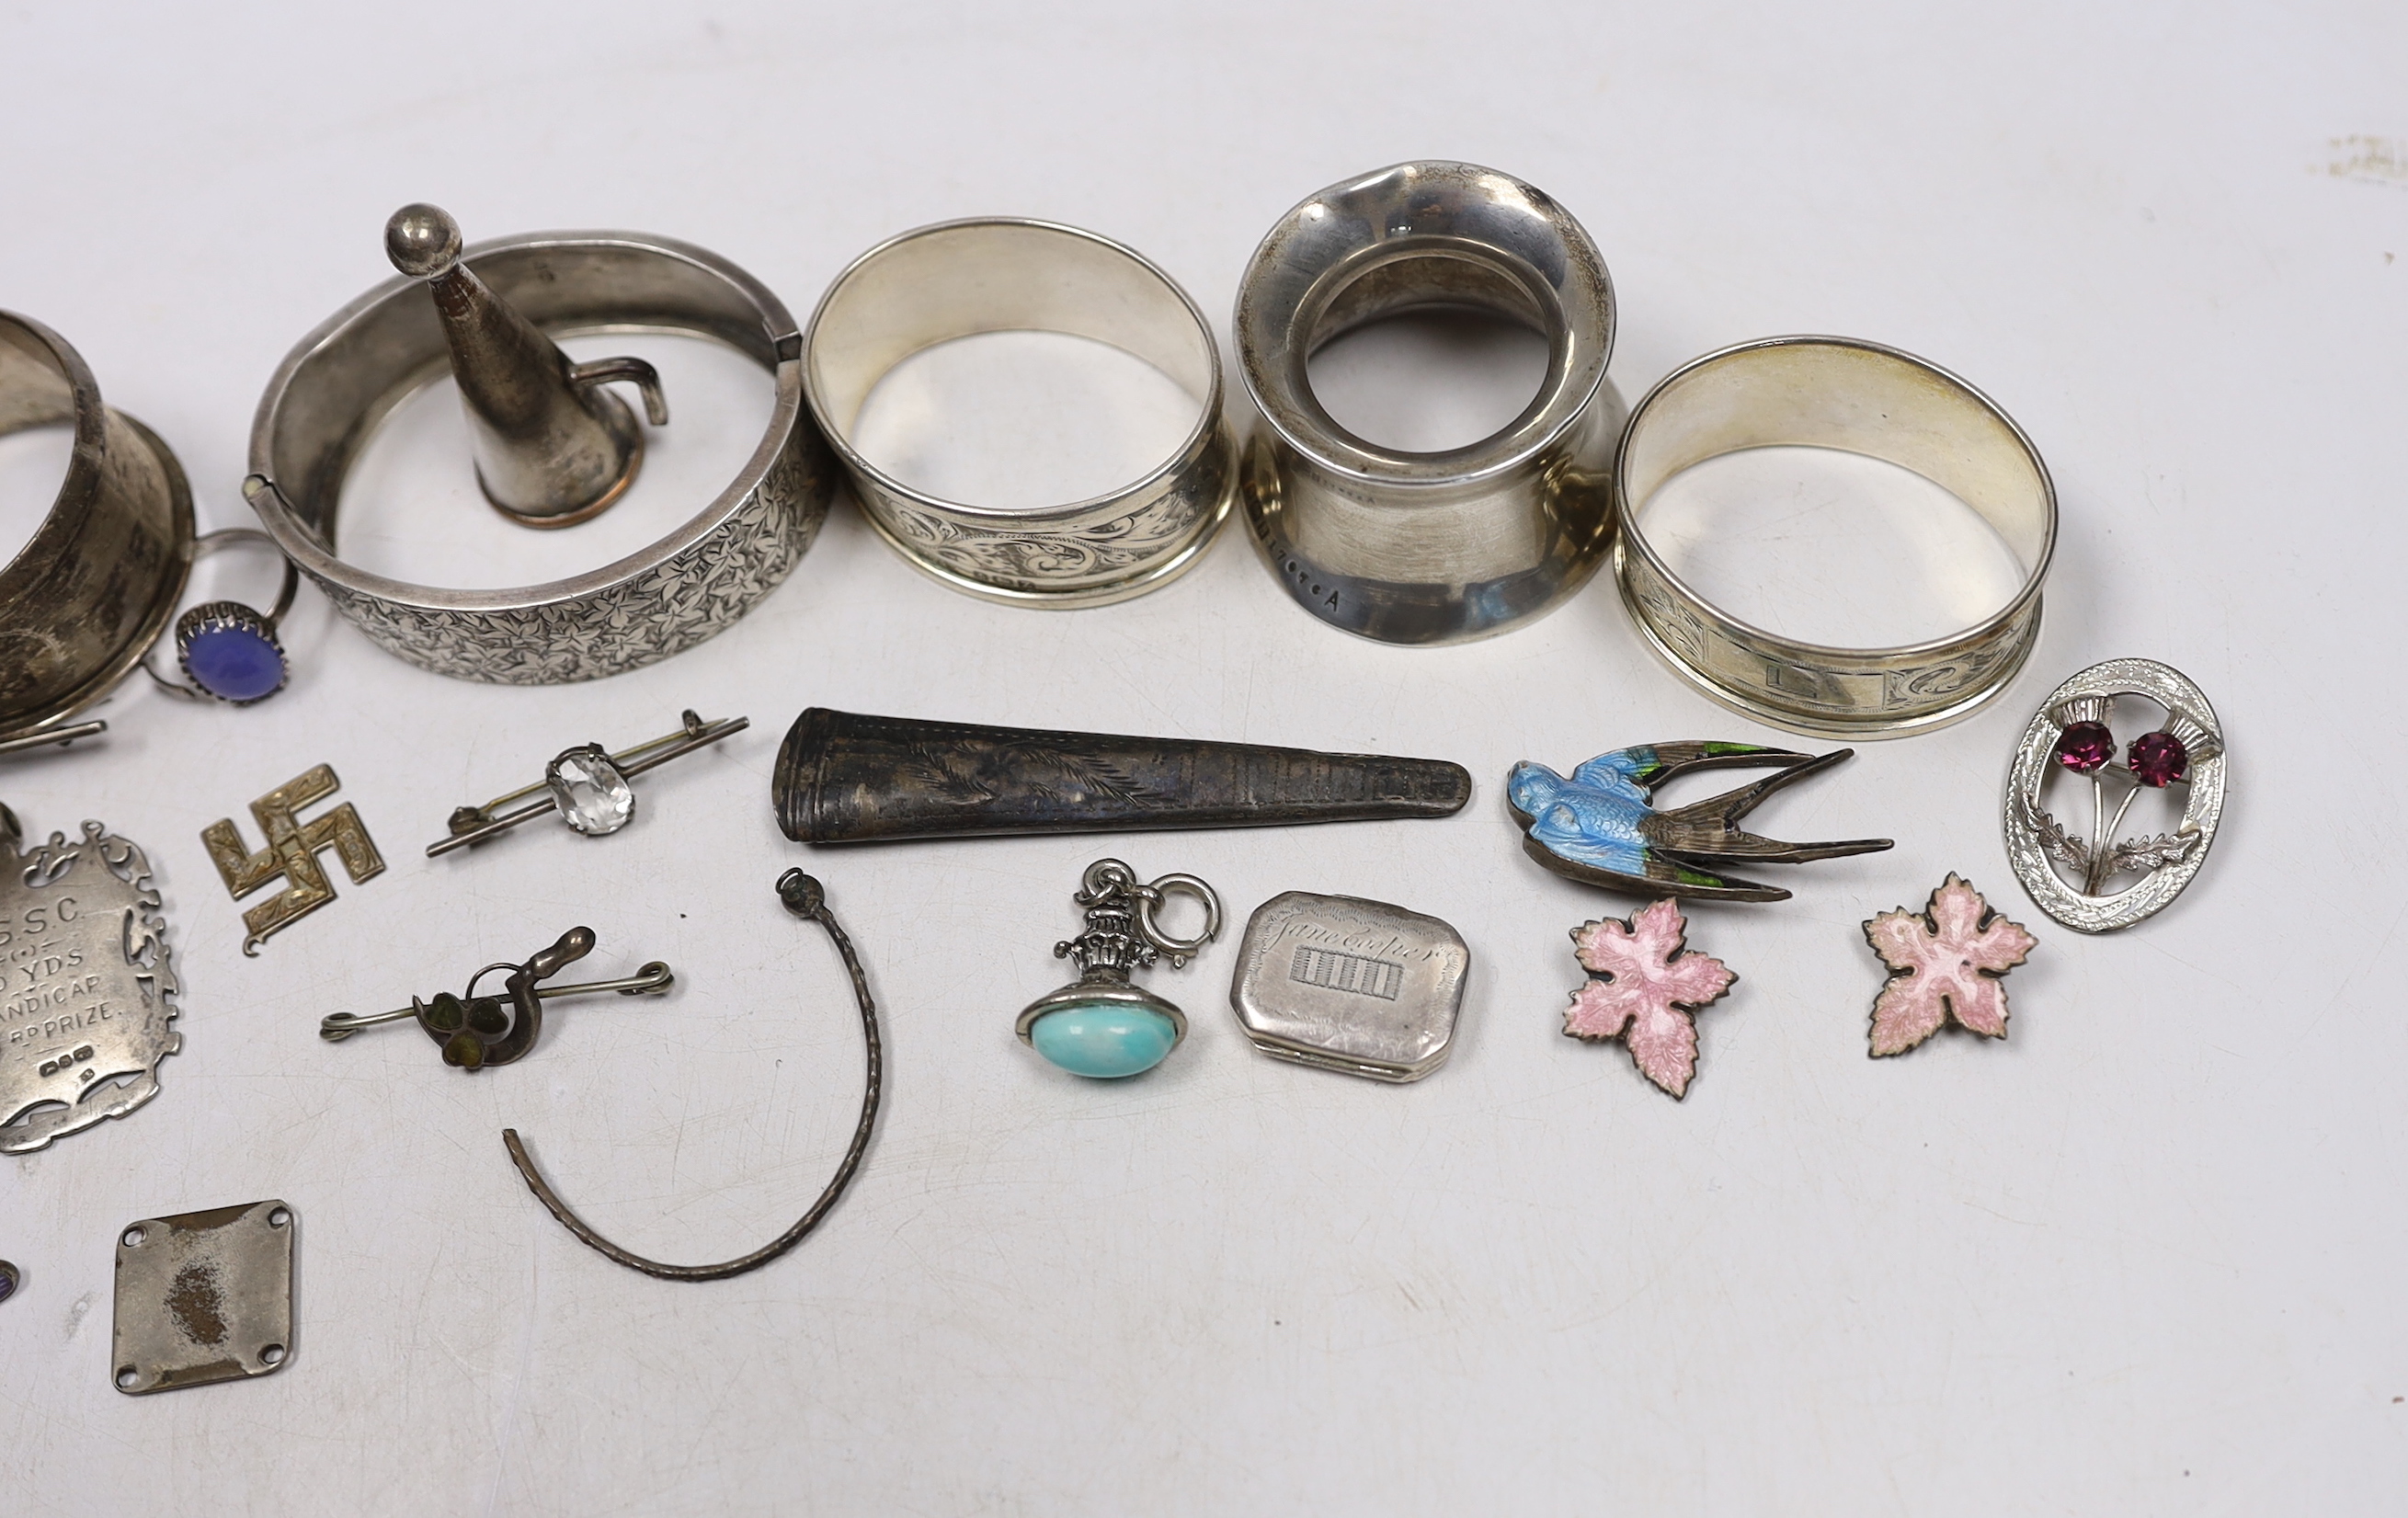 Small silver and other items including napkin rings, bracelets, 19th century vinaigrette, medals, etc.